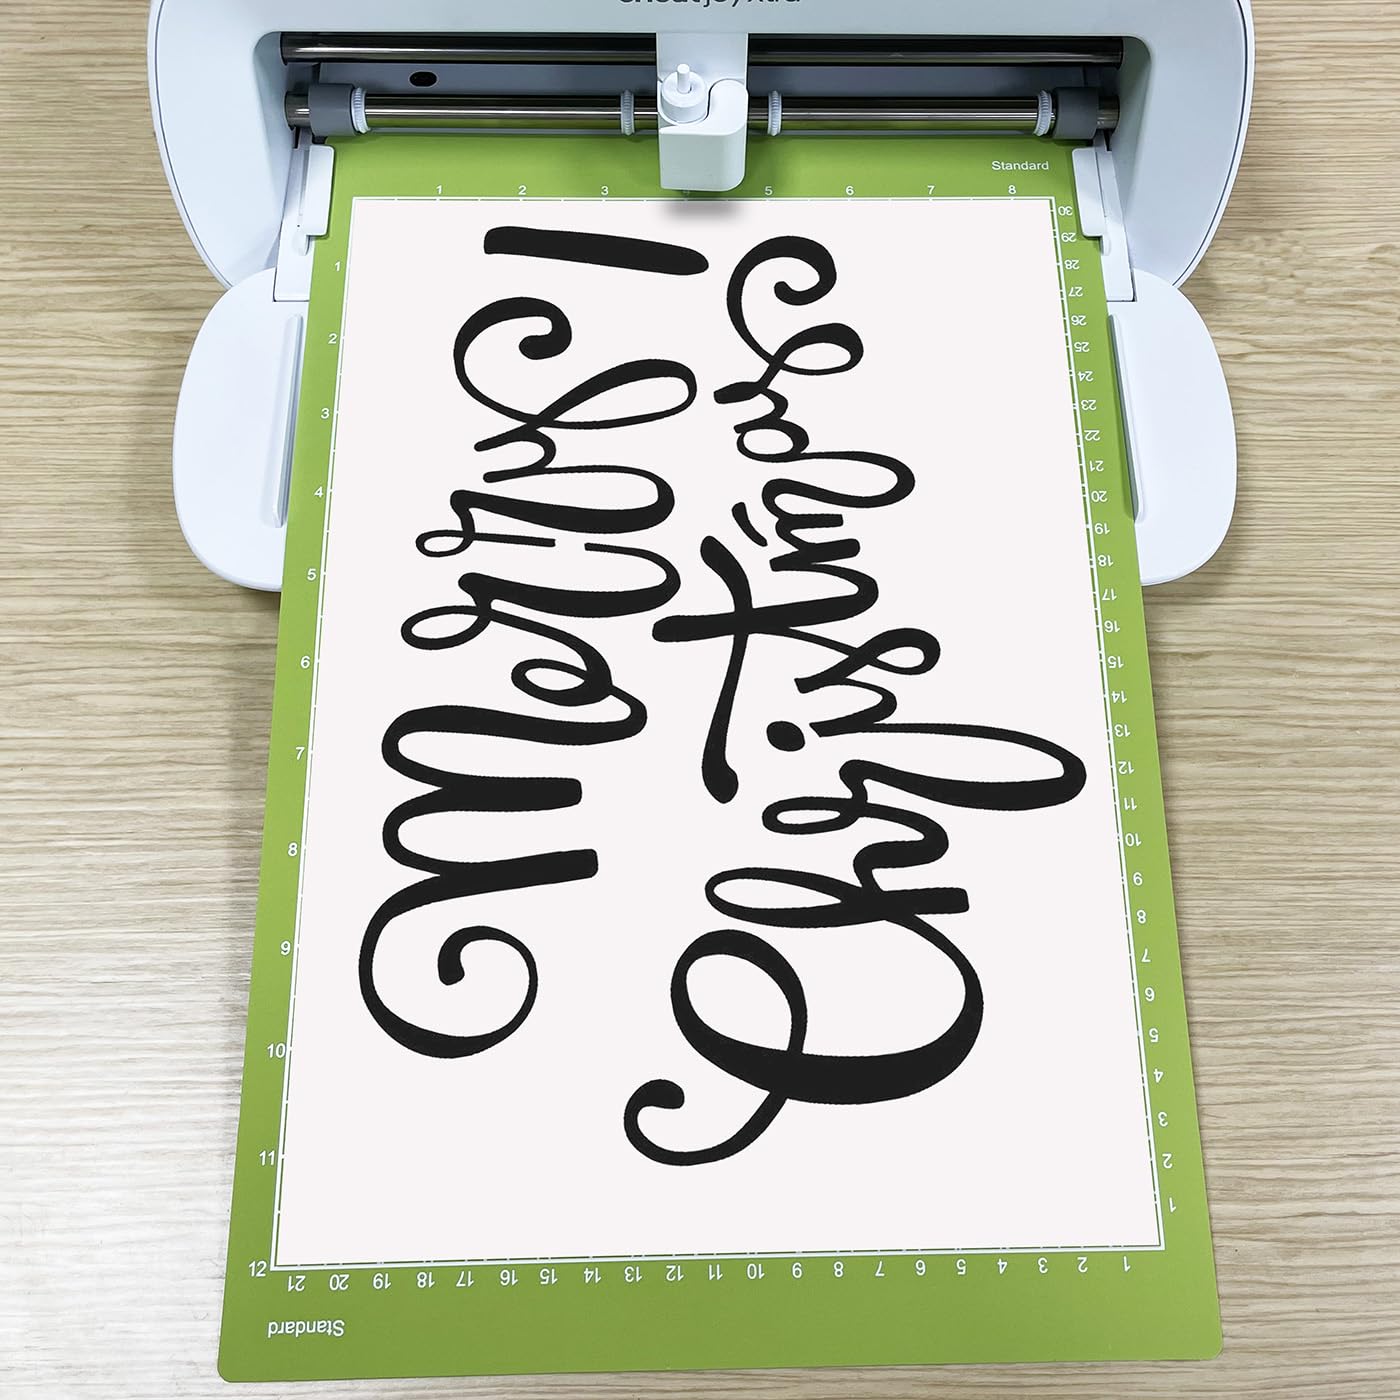  Cricut Standard Grip Machine Mat 8.5in x 12in, Reusable Cutting  Mat for Crafts with Protective Film, Use with Cricut Cardstock, Iron On,  Vinyl and More, Compatible with Cricut Joy Xtra